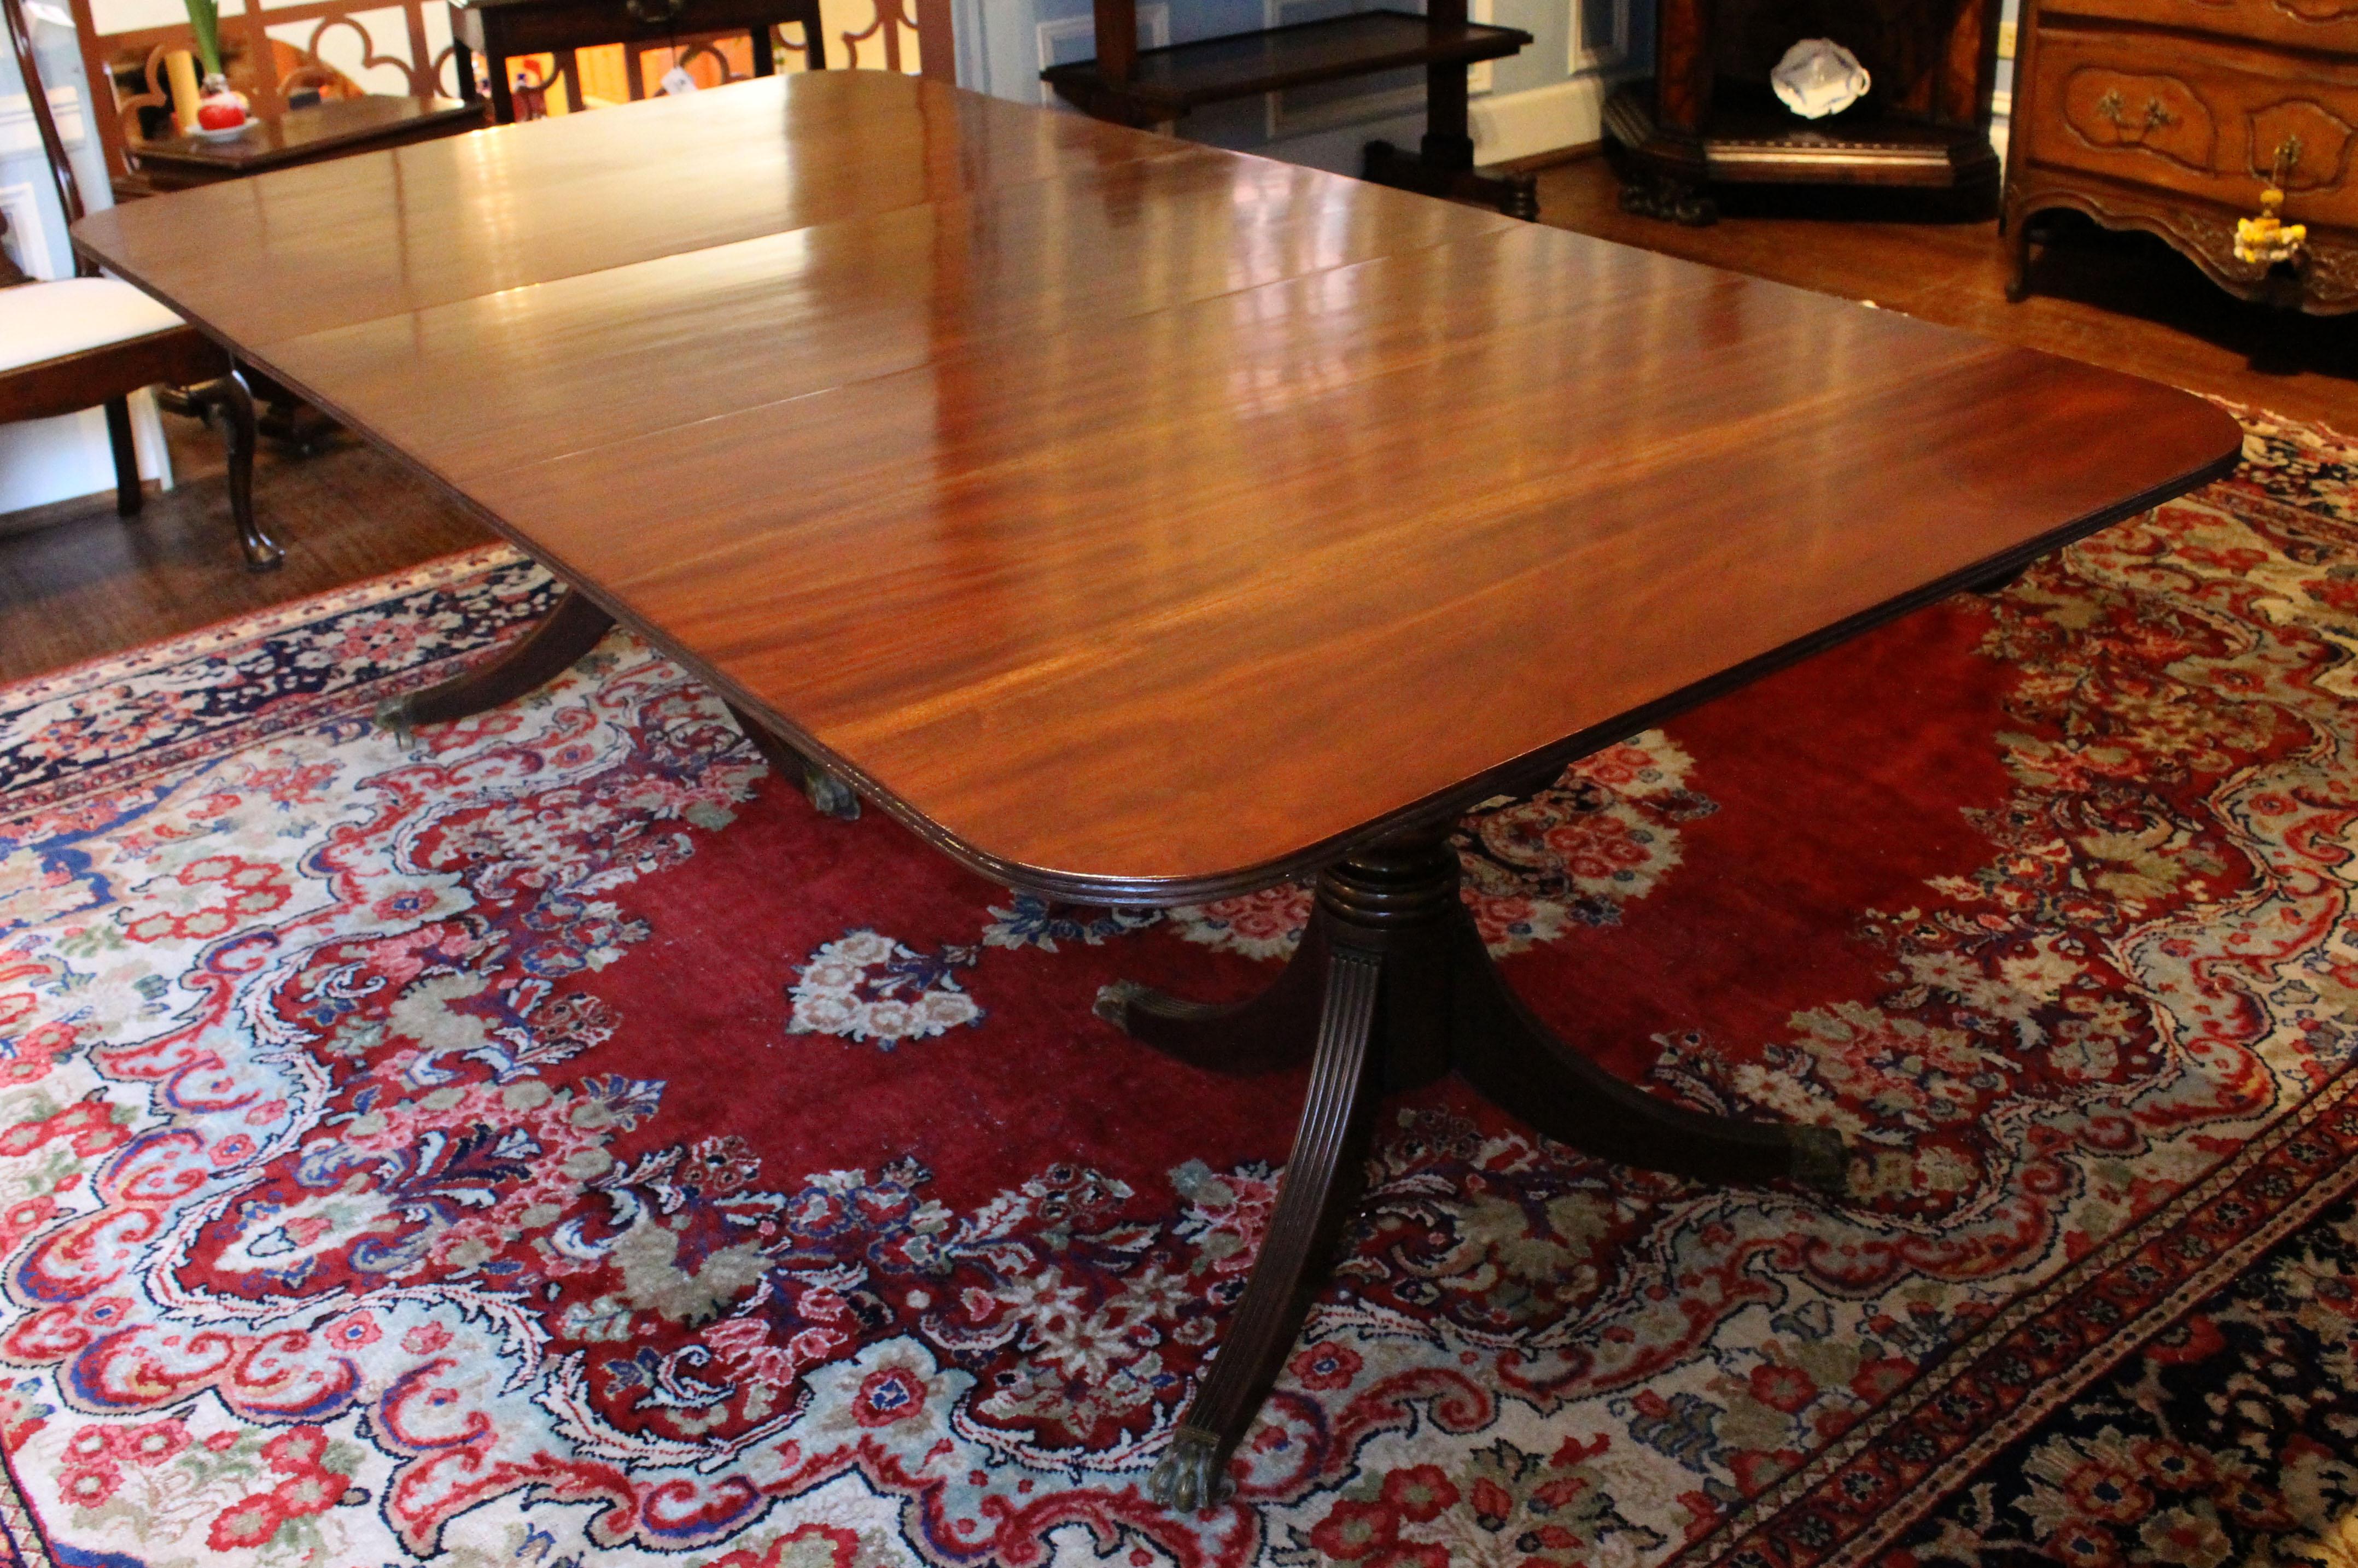 Circa 1835 dining table of solid mahogany. English, William IV period. Raised on twin pedestals, each boldly turned with reeded legs ending in brass paw feet. The reeding repeat on the table edge. One later custom made leaf. The top surfaces